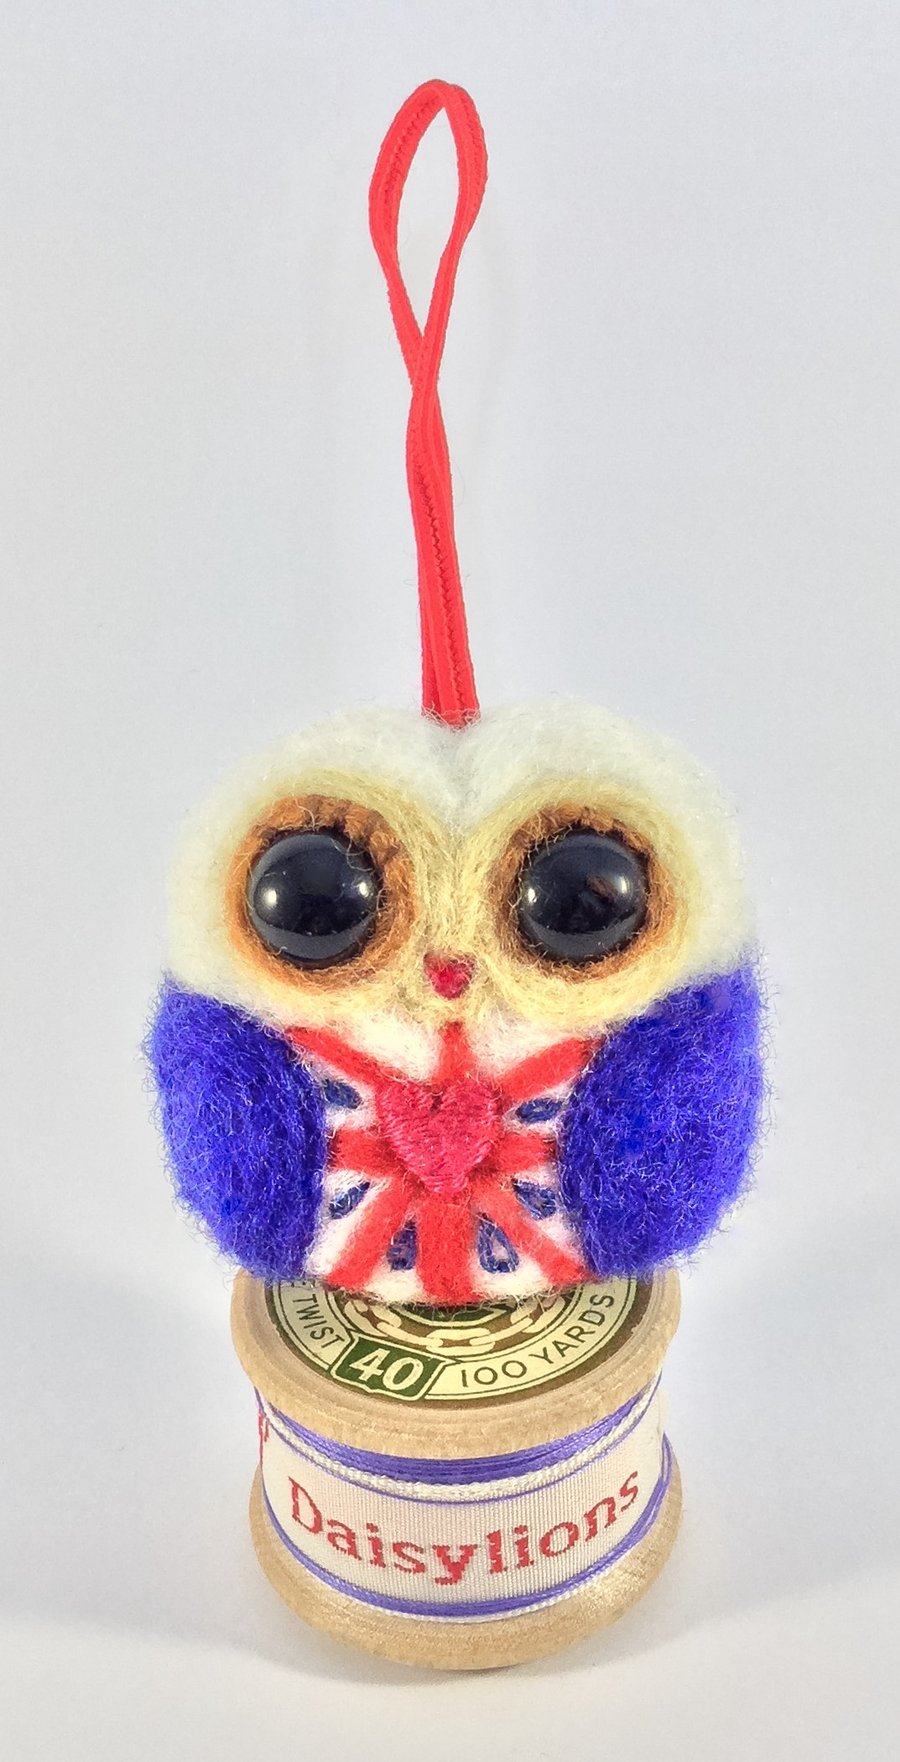 Christmas decoration "Betty the Owl".